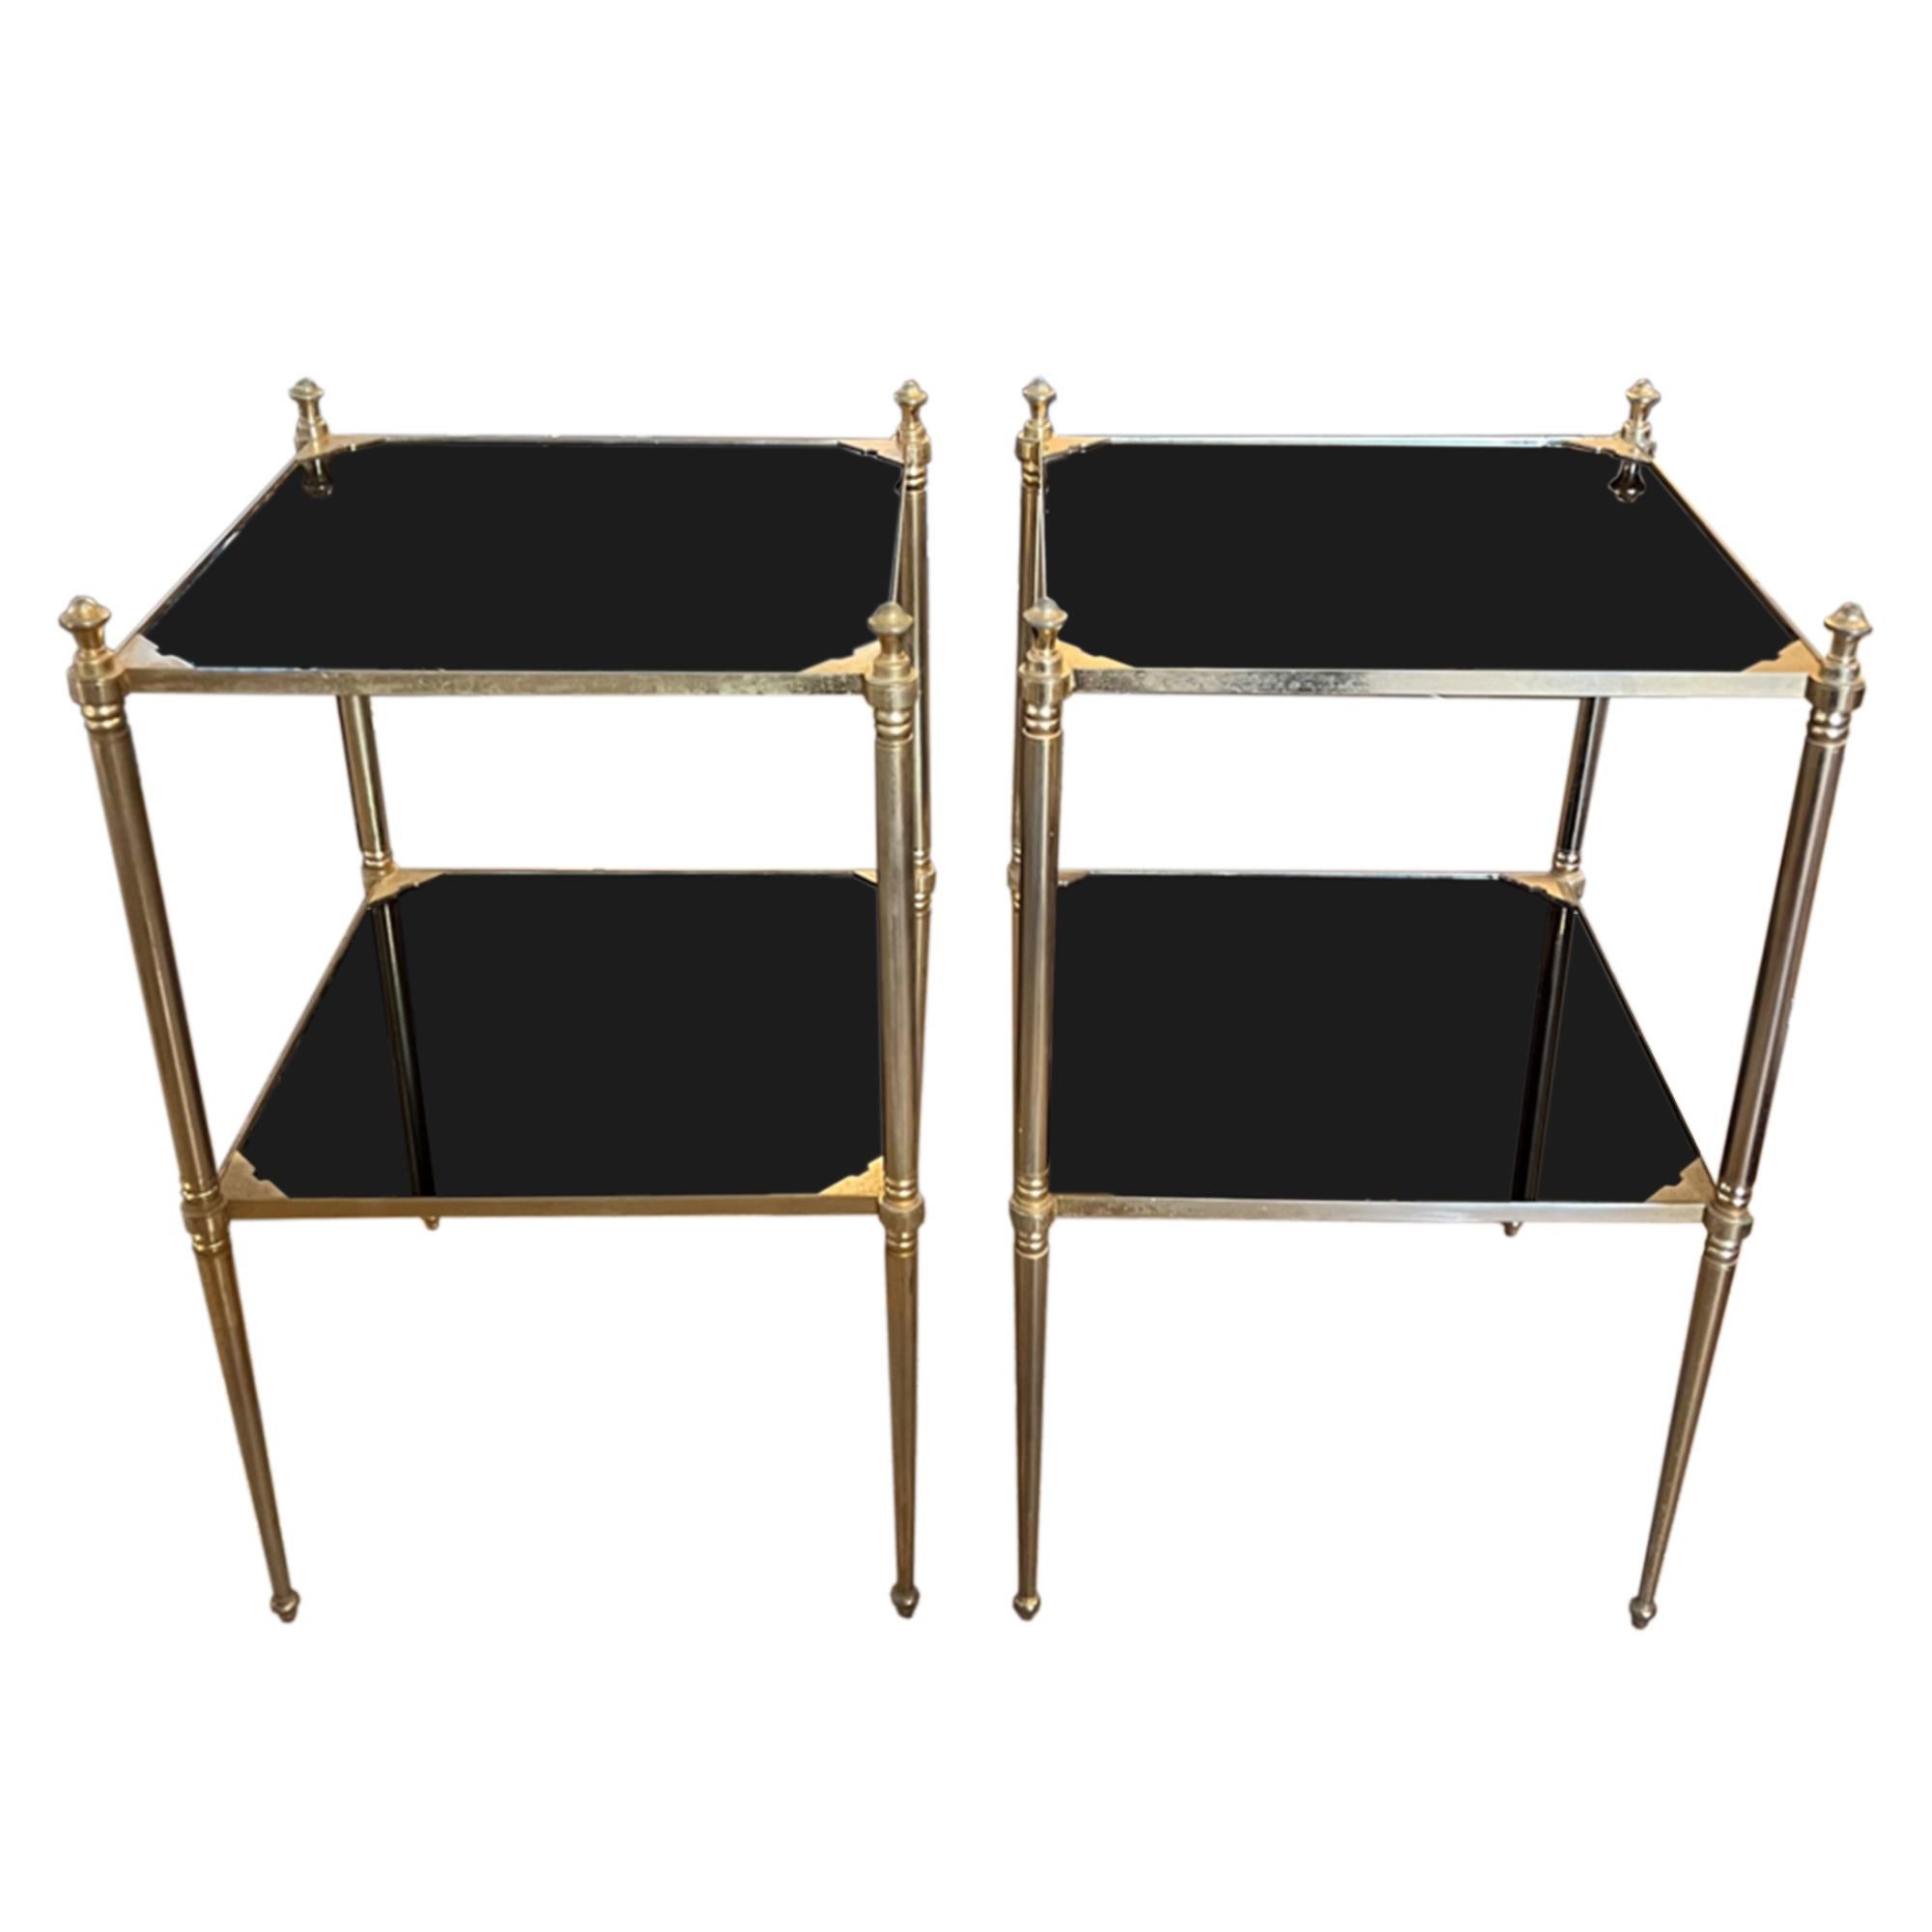 This is a super stylish pair of Jansen style midcentury side tables.

Made in France from gilt metal and black glass. A simple design, but with a very elegant finish - take a look at the edging on the glass and the tapering legs.

Classic French